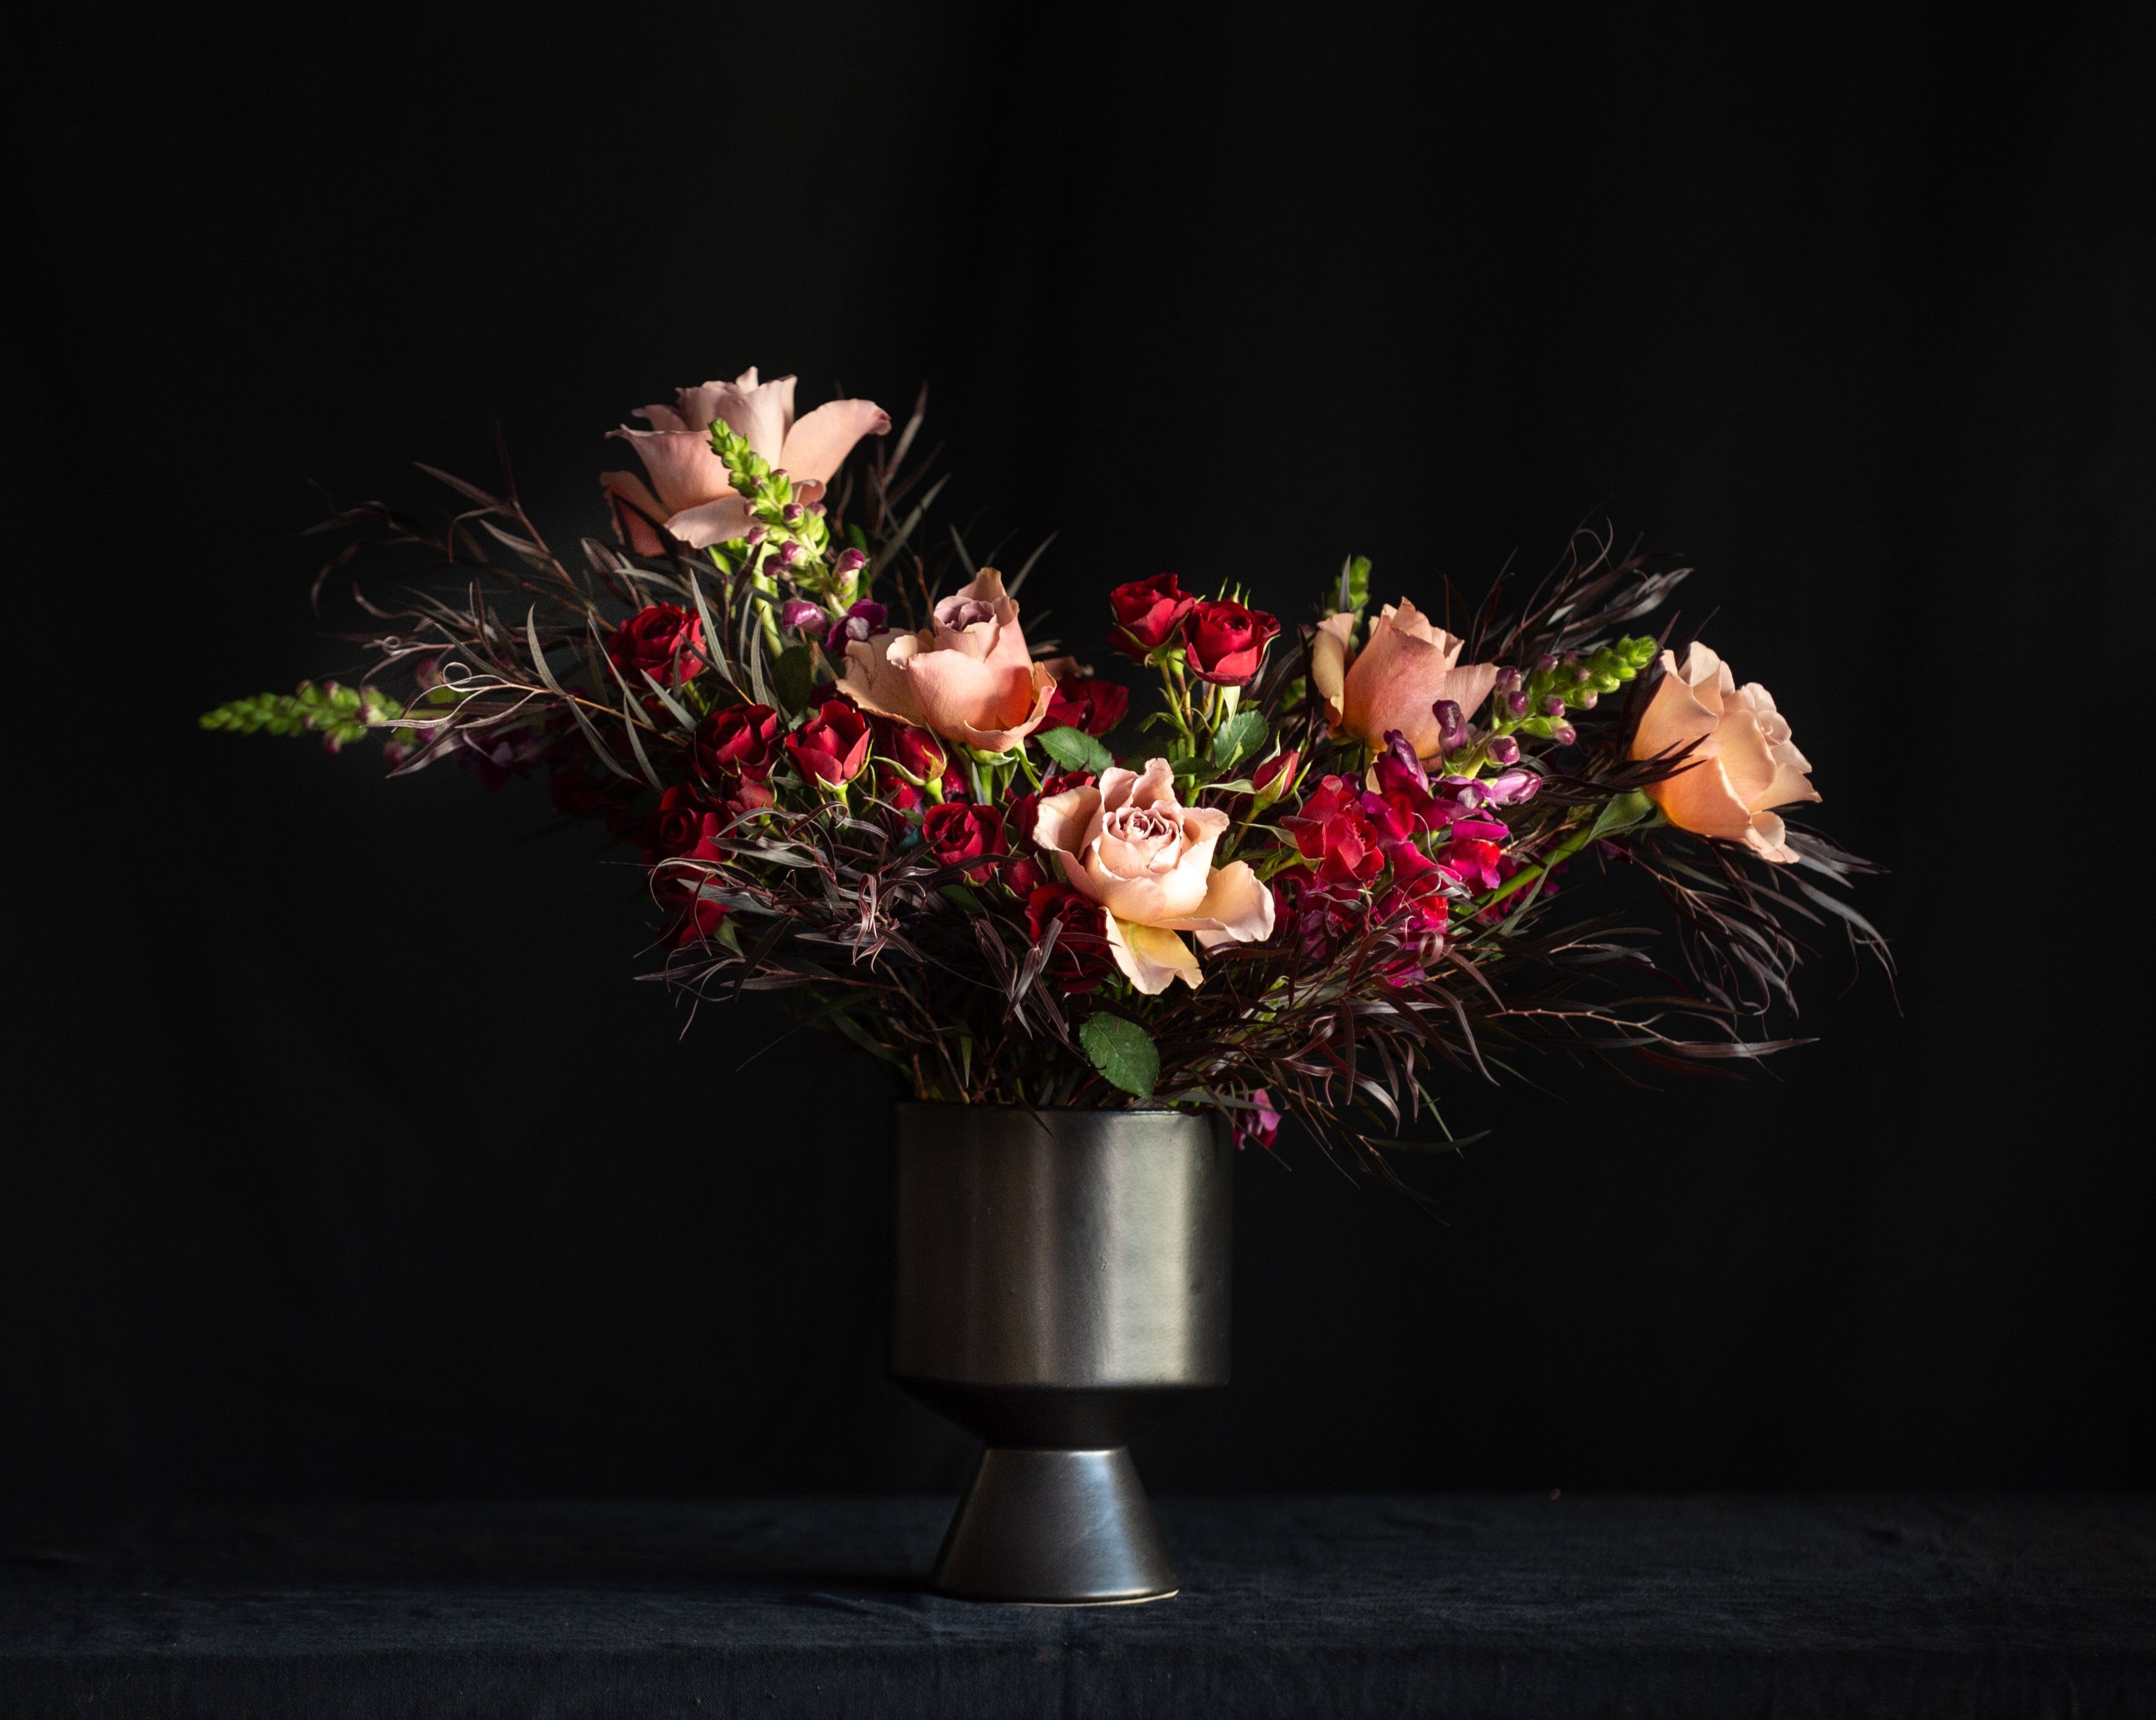 Garden roses, spray roses, and snap dragons for Valentines day in a black vae